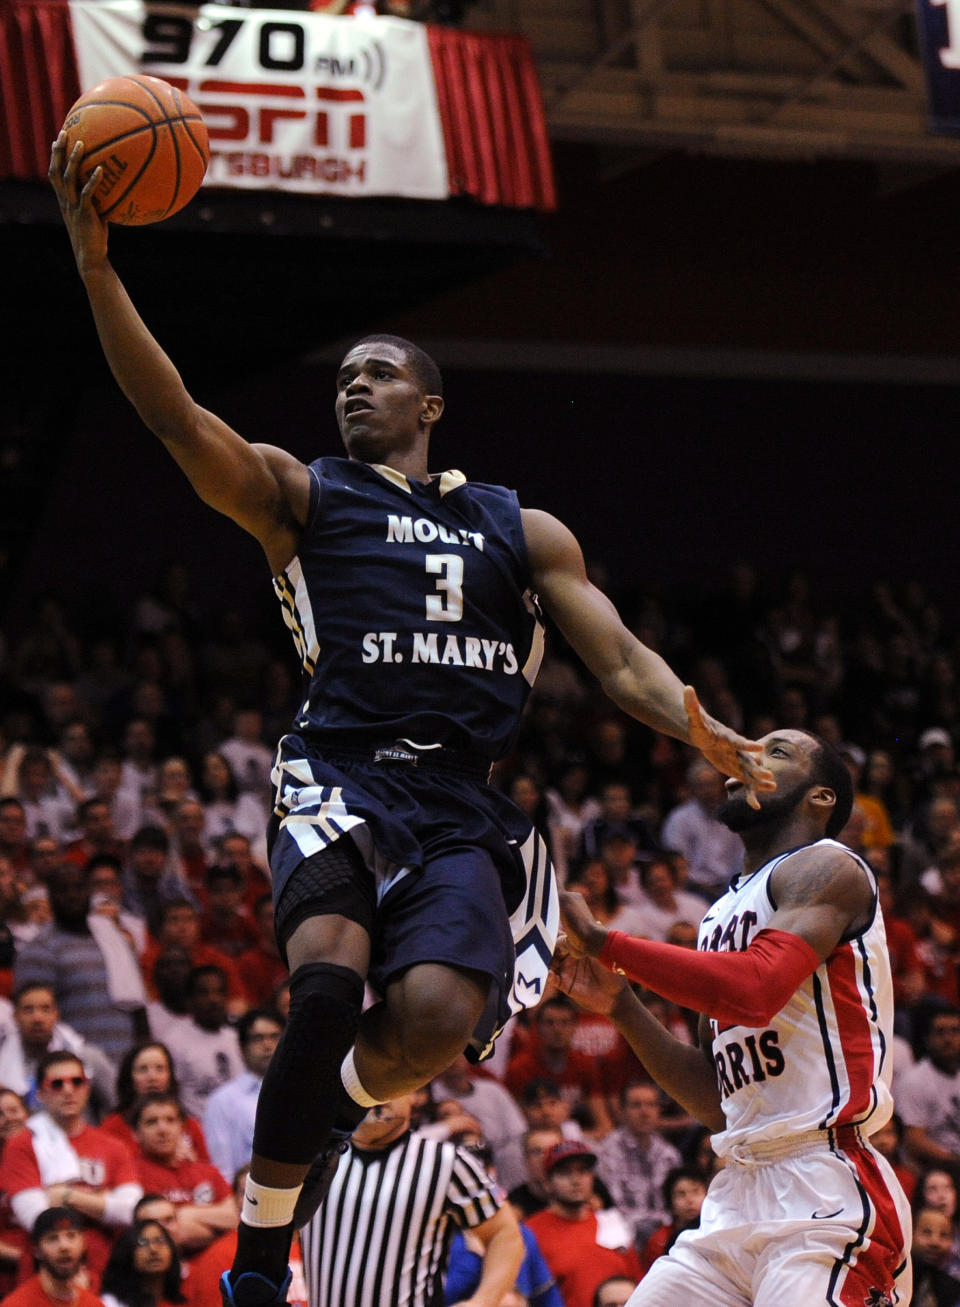 Mount St. Mary's' Sam Prescott (3) drives for a lay up against Robert Morris' Lucky Jones during the first half of the Northeastern Conference championship NCAA college basketball game on Tuesday, March 11, 2014, in Coraopolis, Pa. (AP Photo/Don Wright)